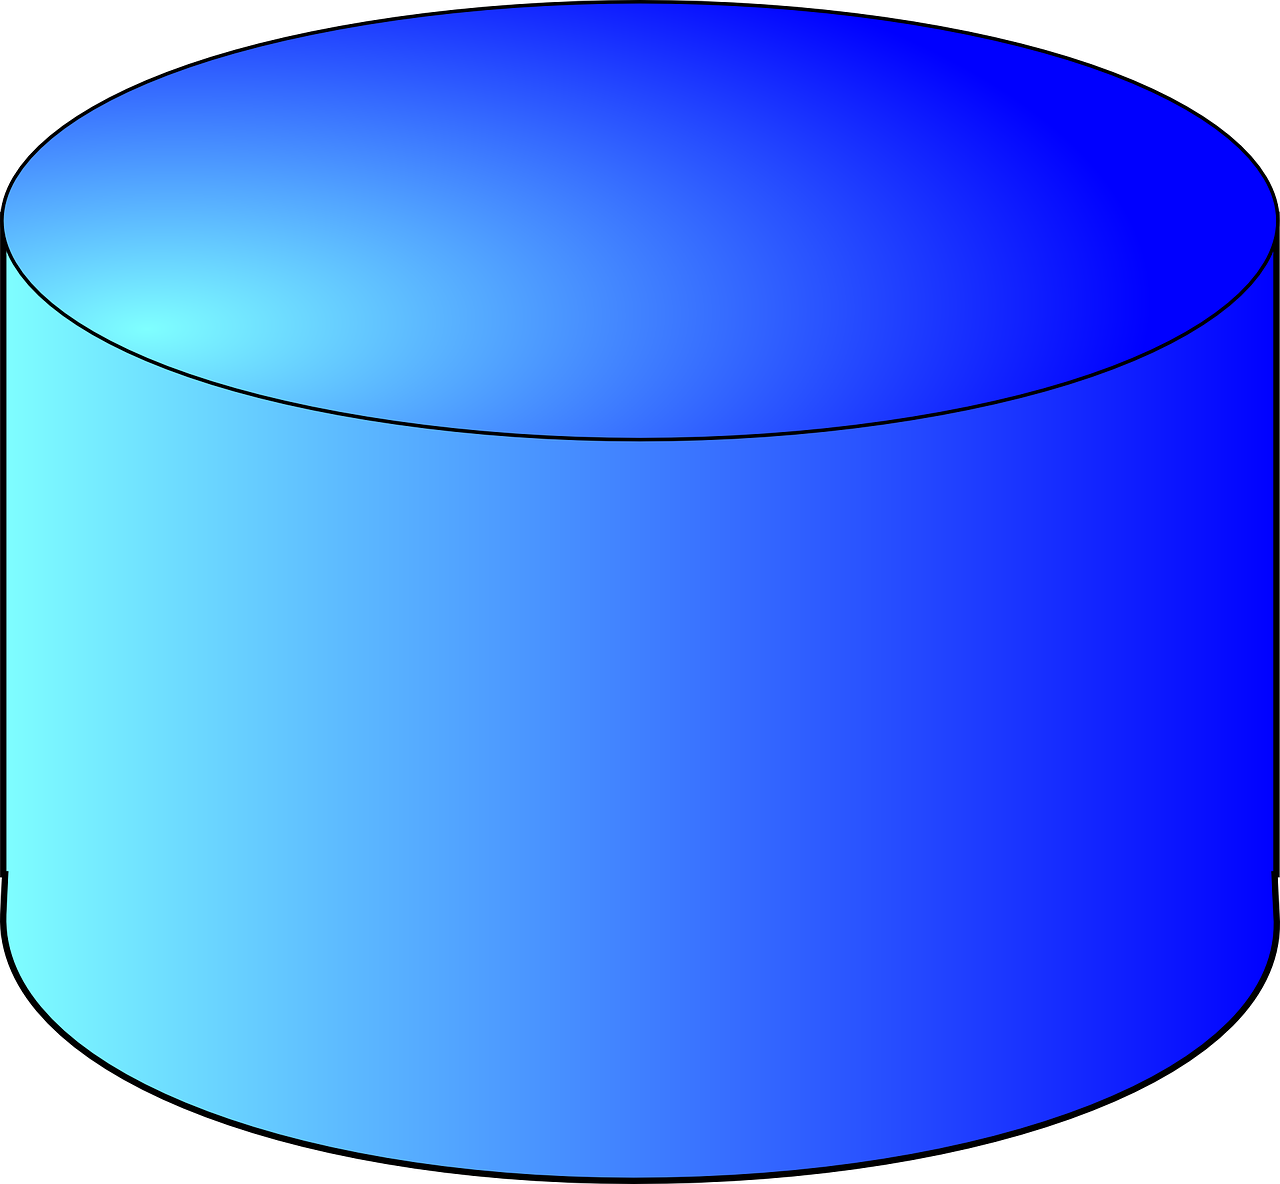 A cylinder shape has a circular top and bottom that are parallel to each other with straight sides connecting the circles.